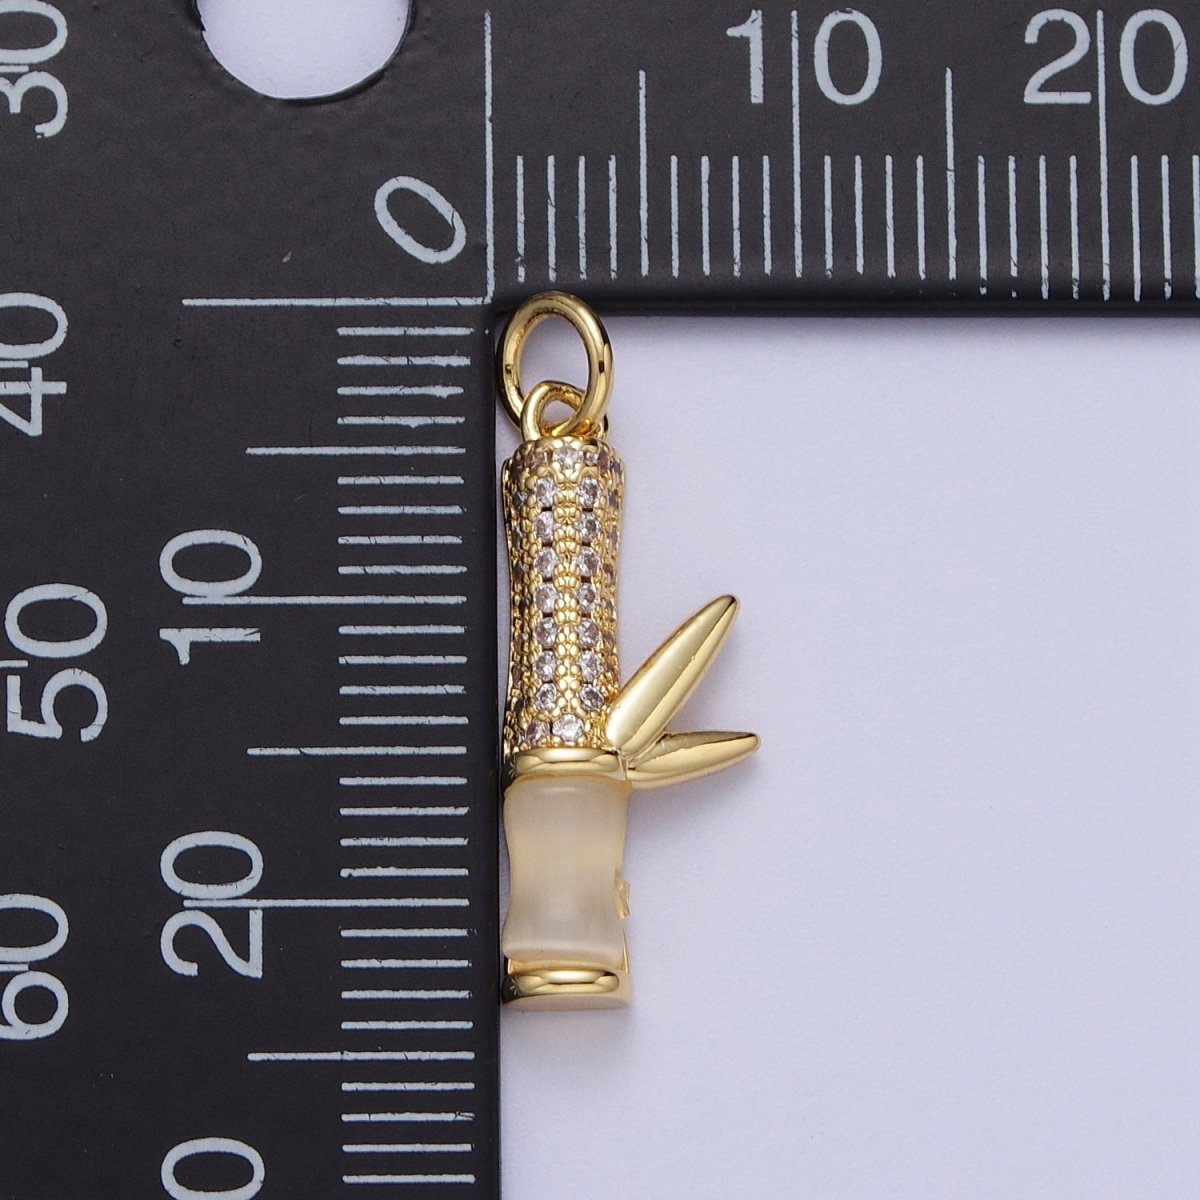 Micro Paved Gold Off White Cats Eye Bamboo Leaf Charm For Nature Plant Jewelry Making | C-521 - DLUXCA